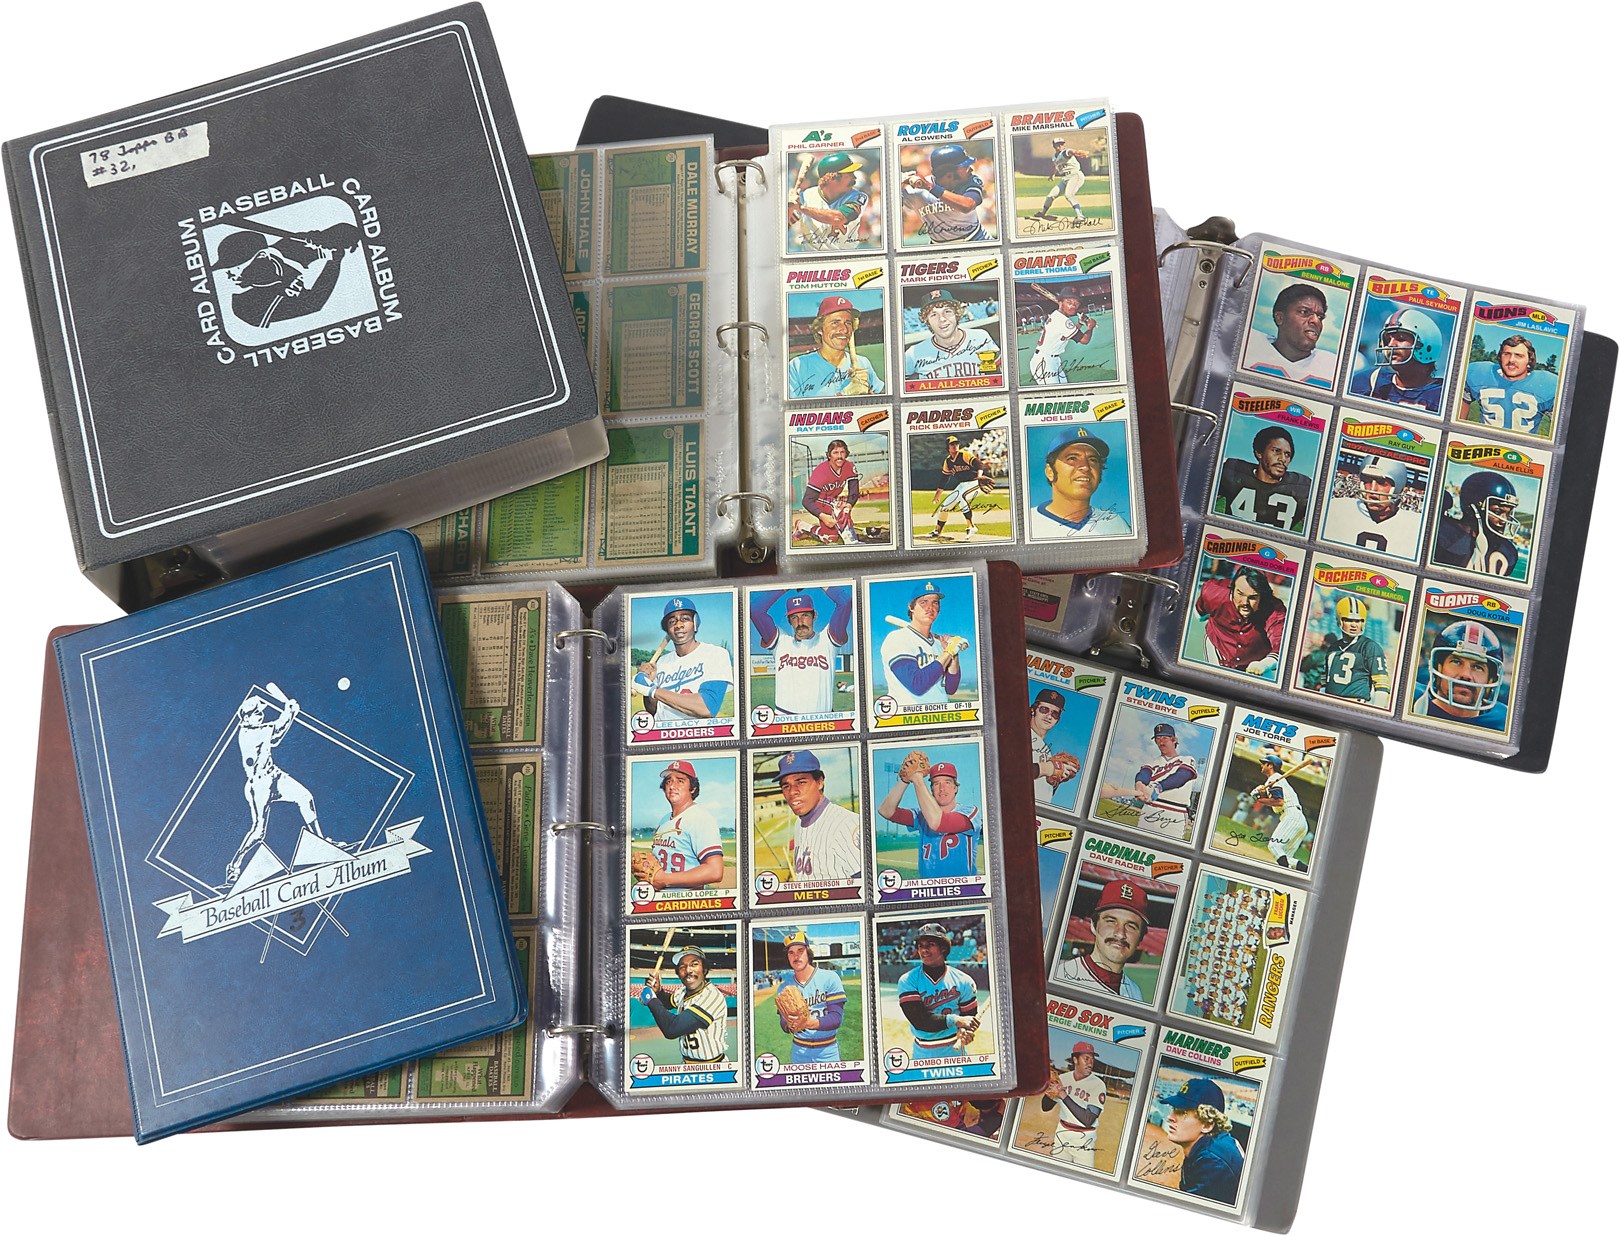 Baseball and Trading Cards - 1959 Fleer Ted Williams & 1970s Topps Sets w/Extras (9000+ Cards)